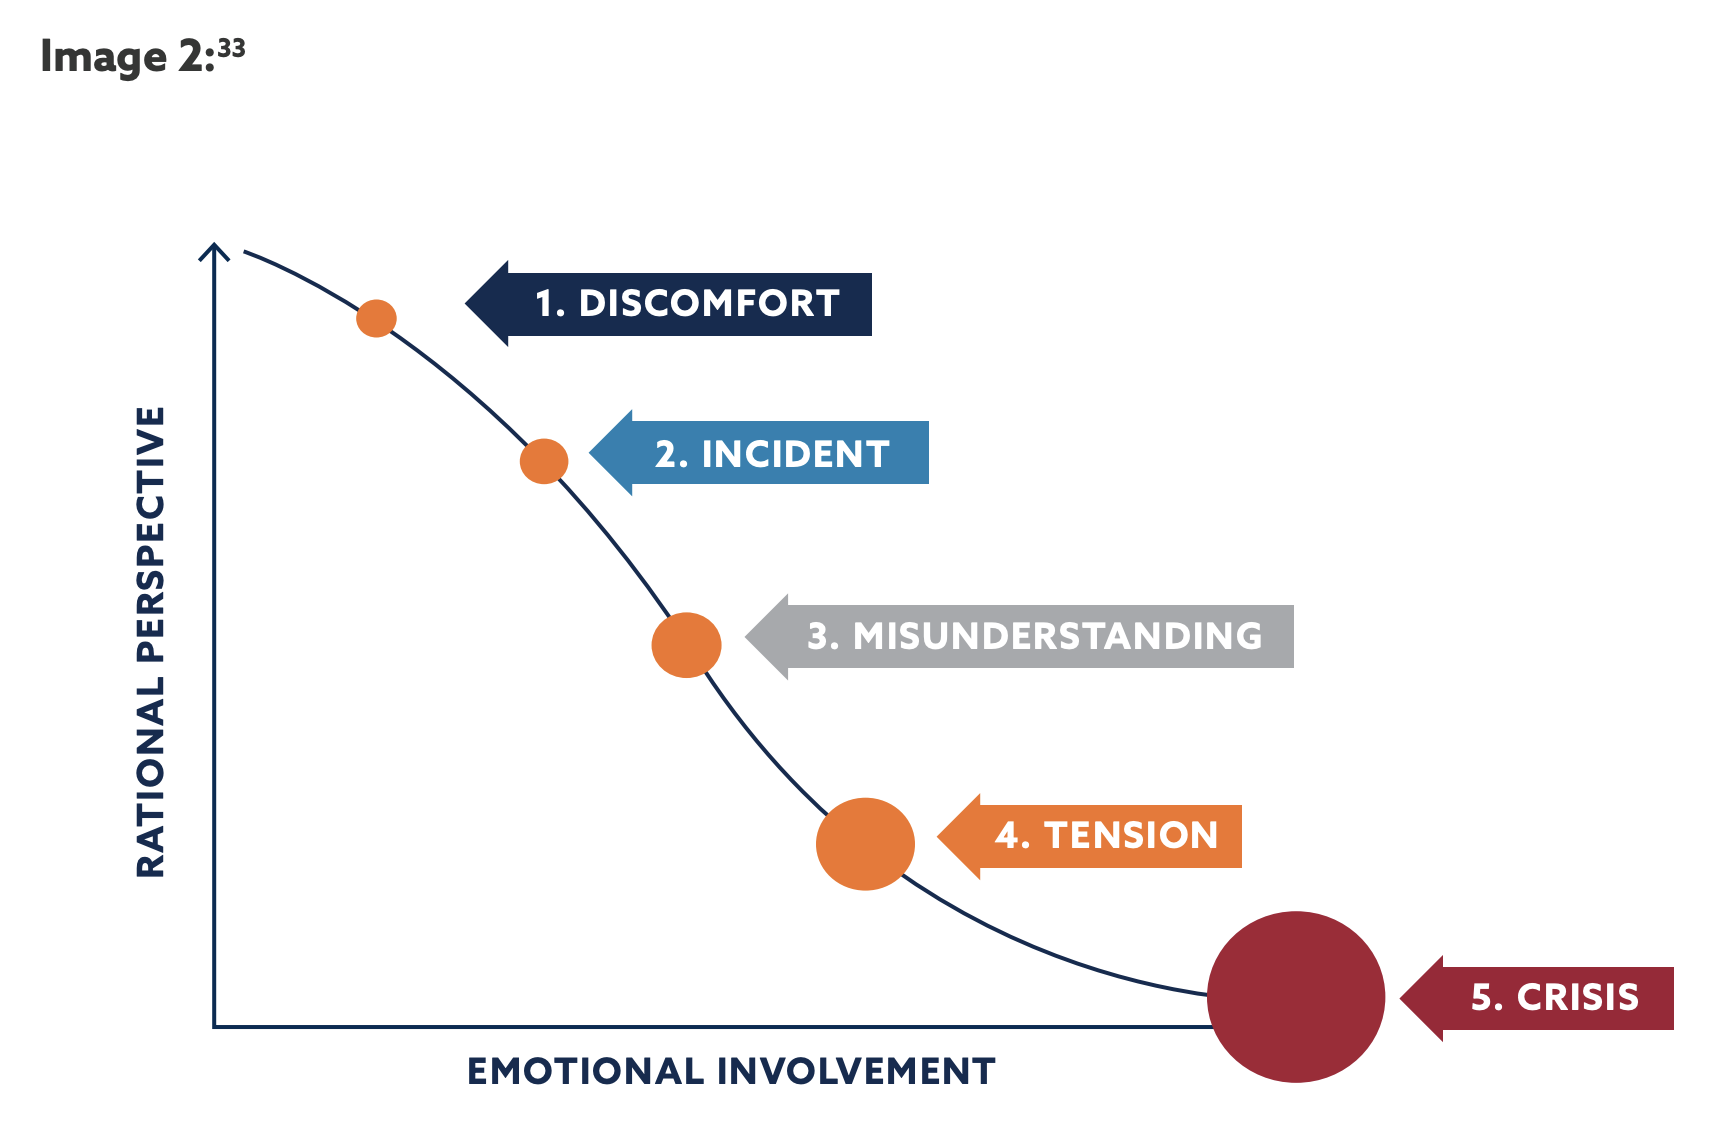 Graph charting rational perspective and emotional involvement.  As emotional involvement increases, rational perspective decreases, leading to a crisis.  